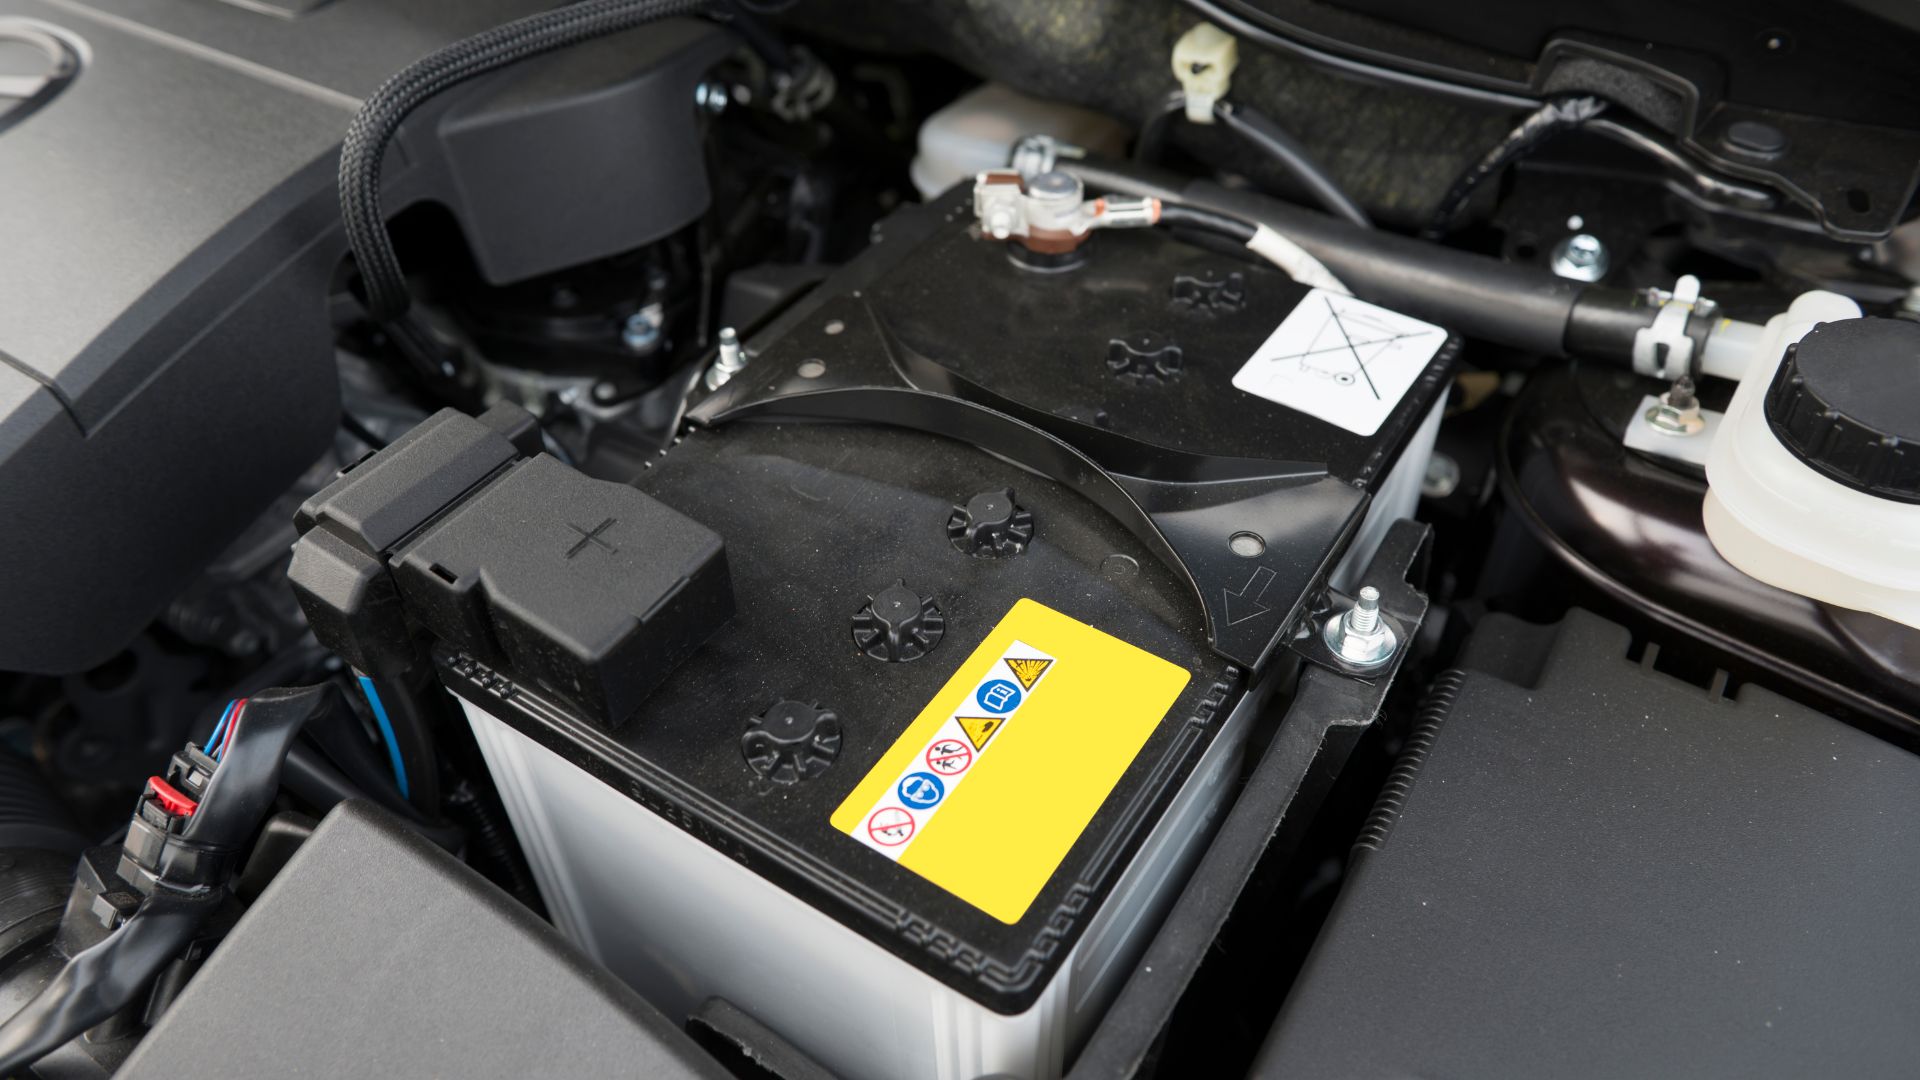 can a car battery test good and still be bad